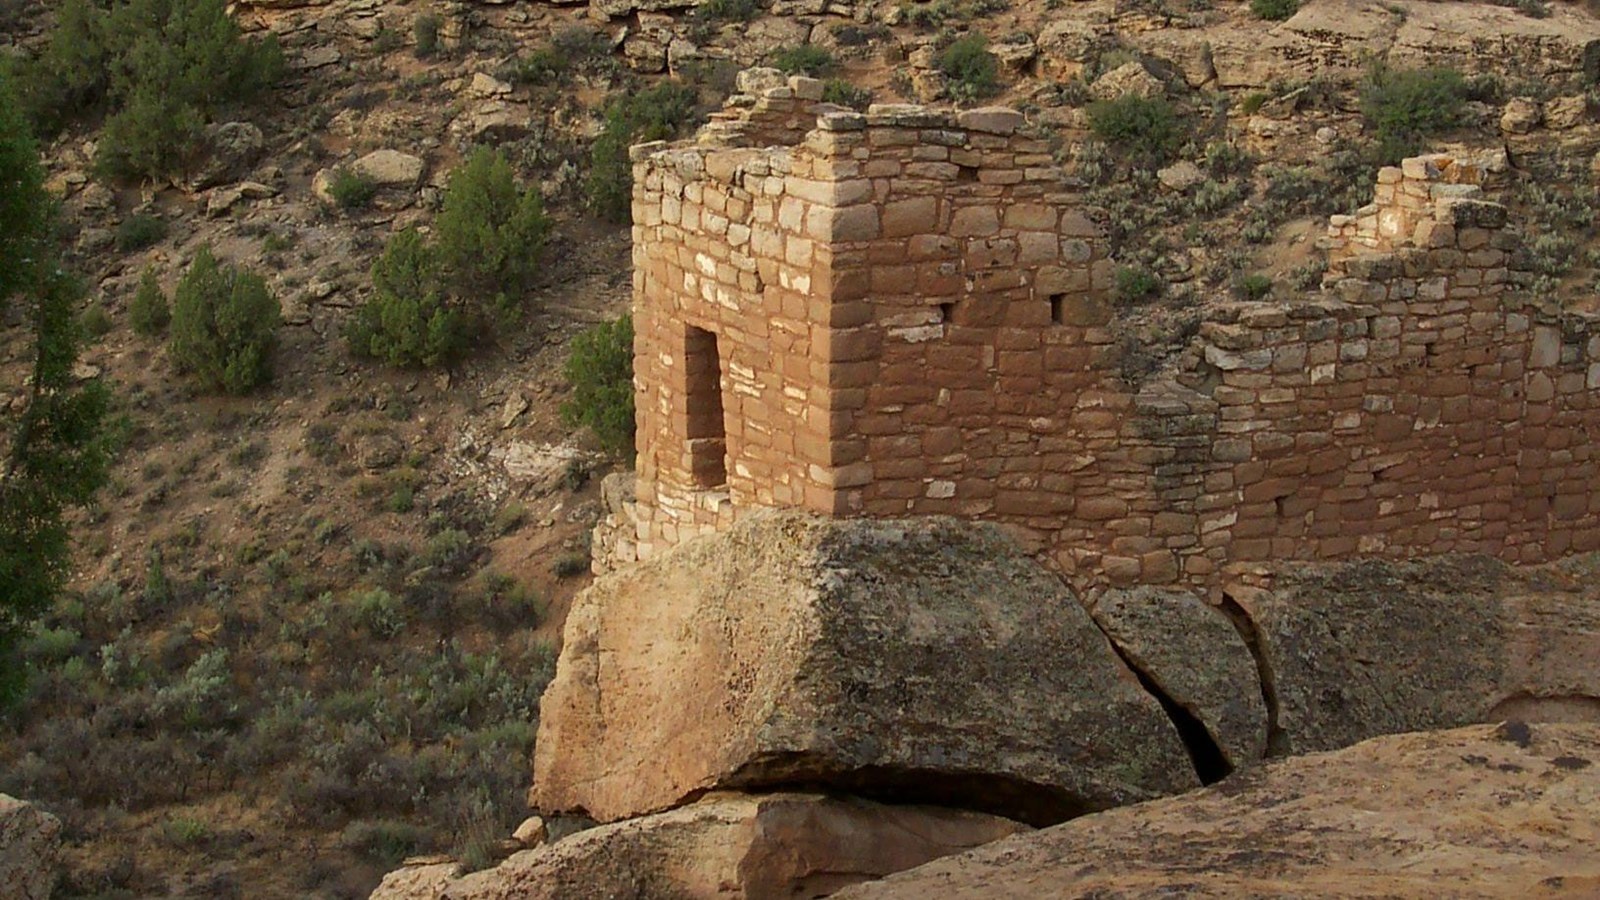 remains of a rectangular stone structure perched on a boulder next to the canyon rim. A doorway face